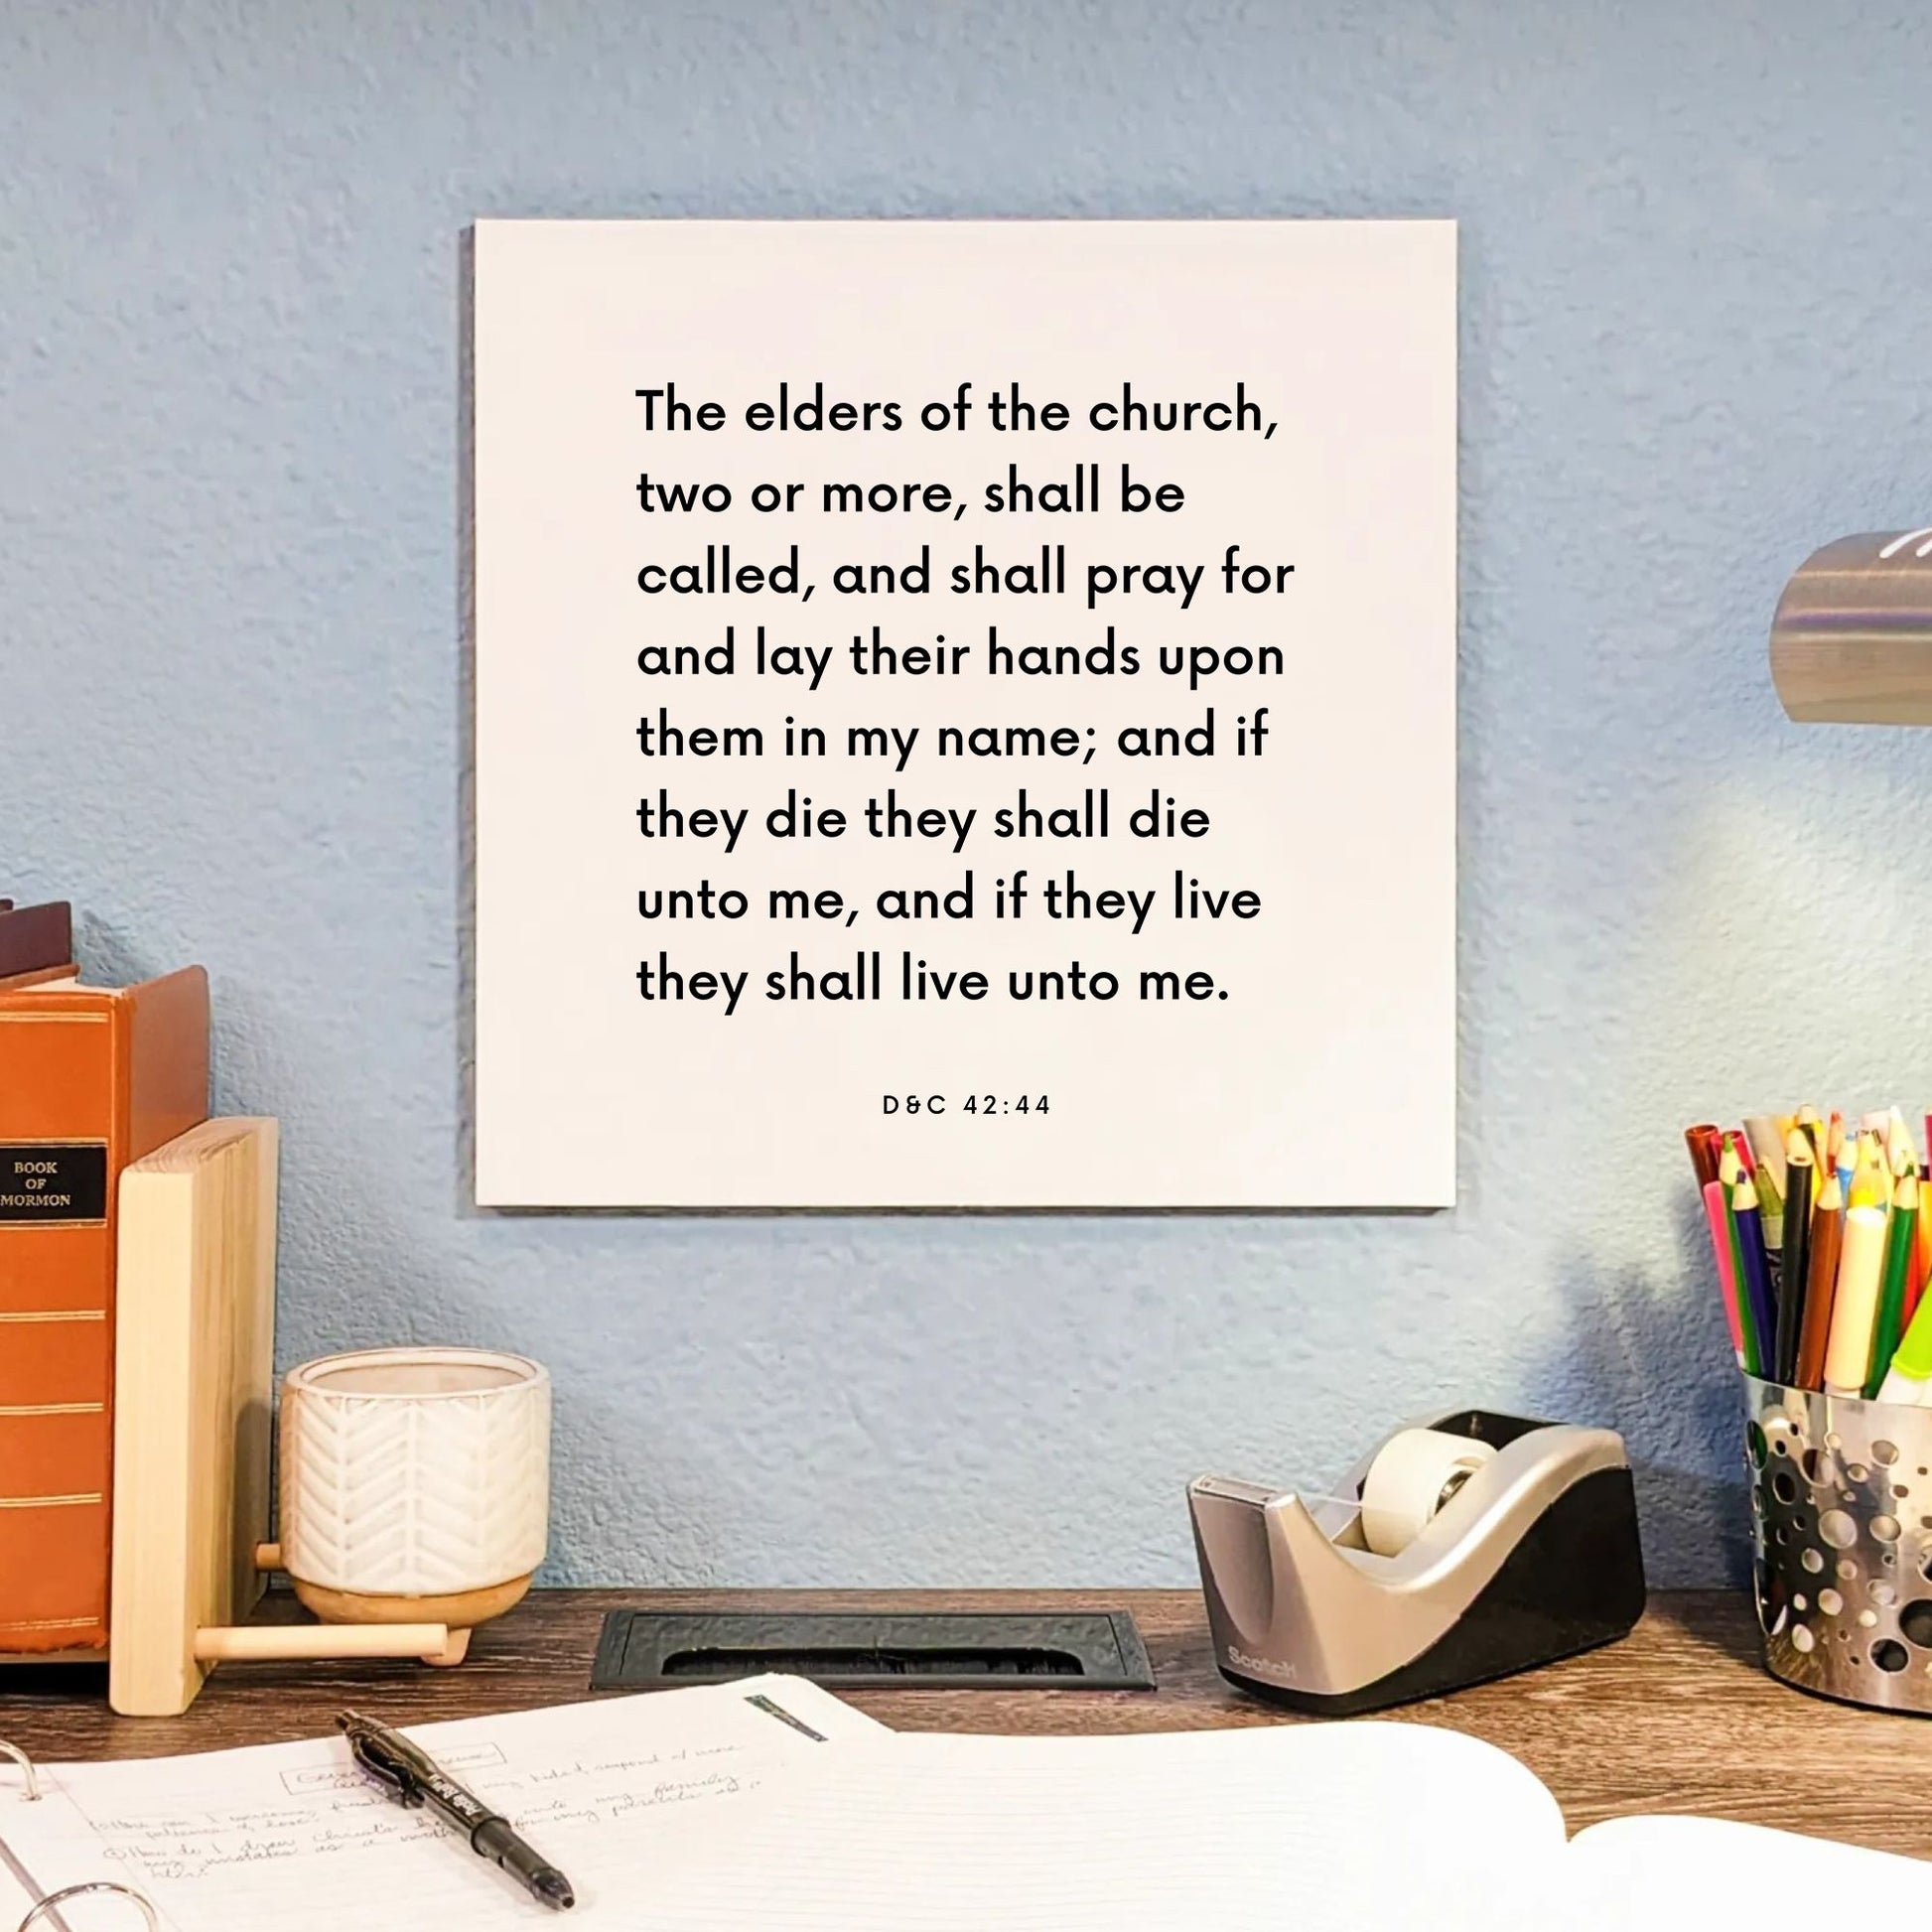 Desk mouting of the scripture tile for D&C 42:44 - "The elders of the church shall lay their hands upon them"